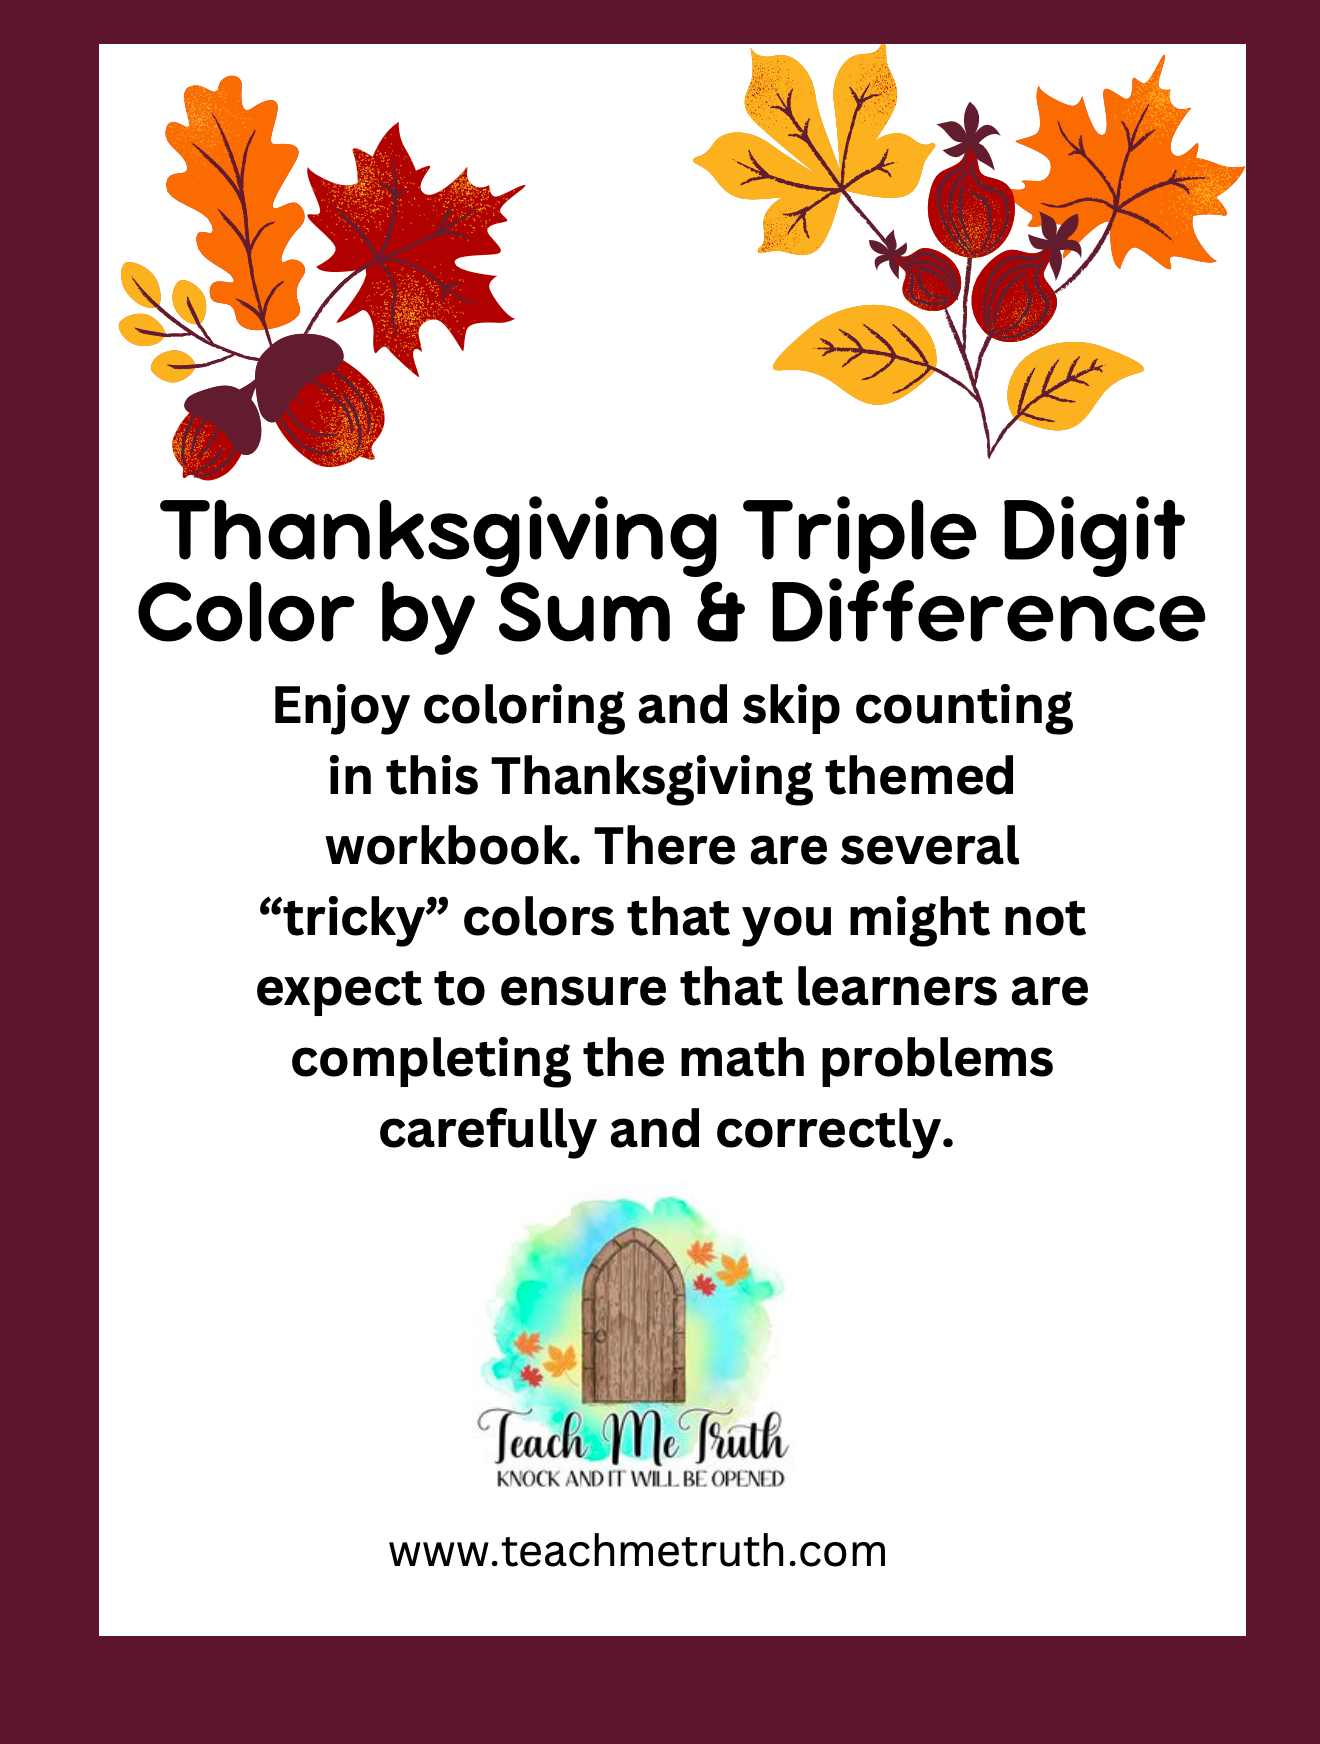 Thanksgiving Triple Digit Color by Sum & Difference